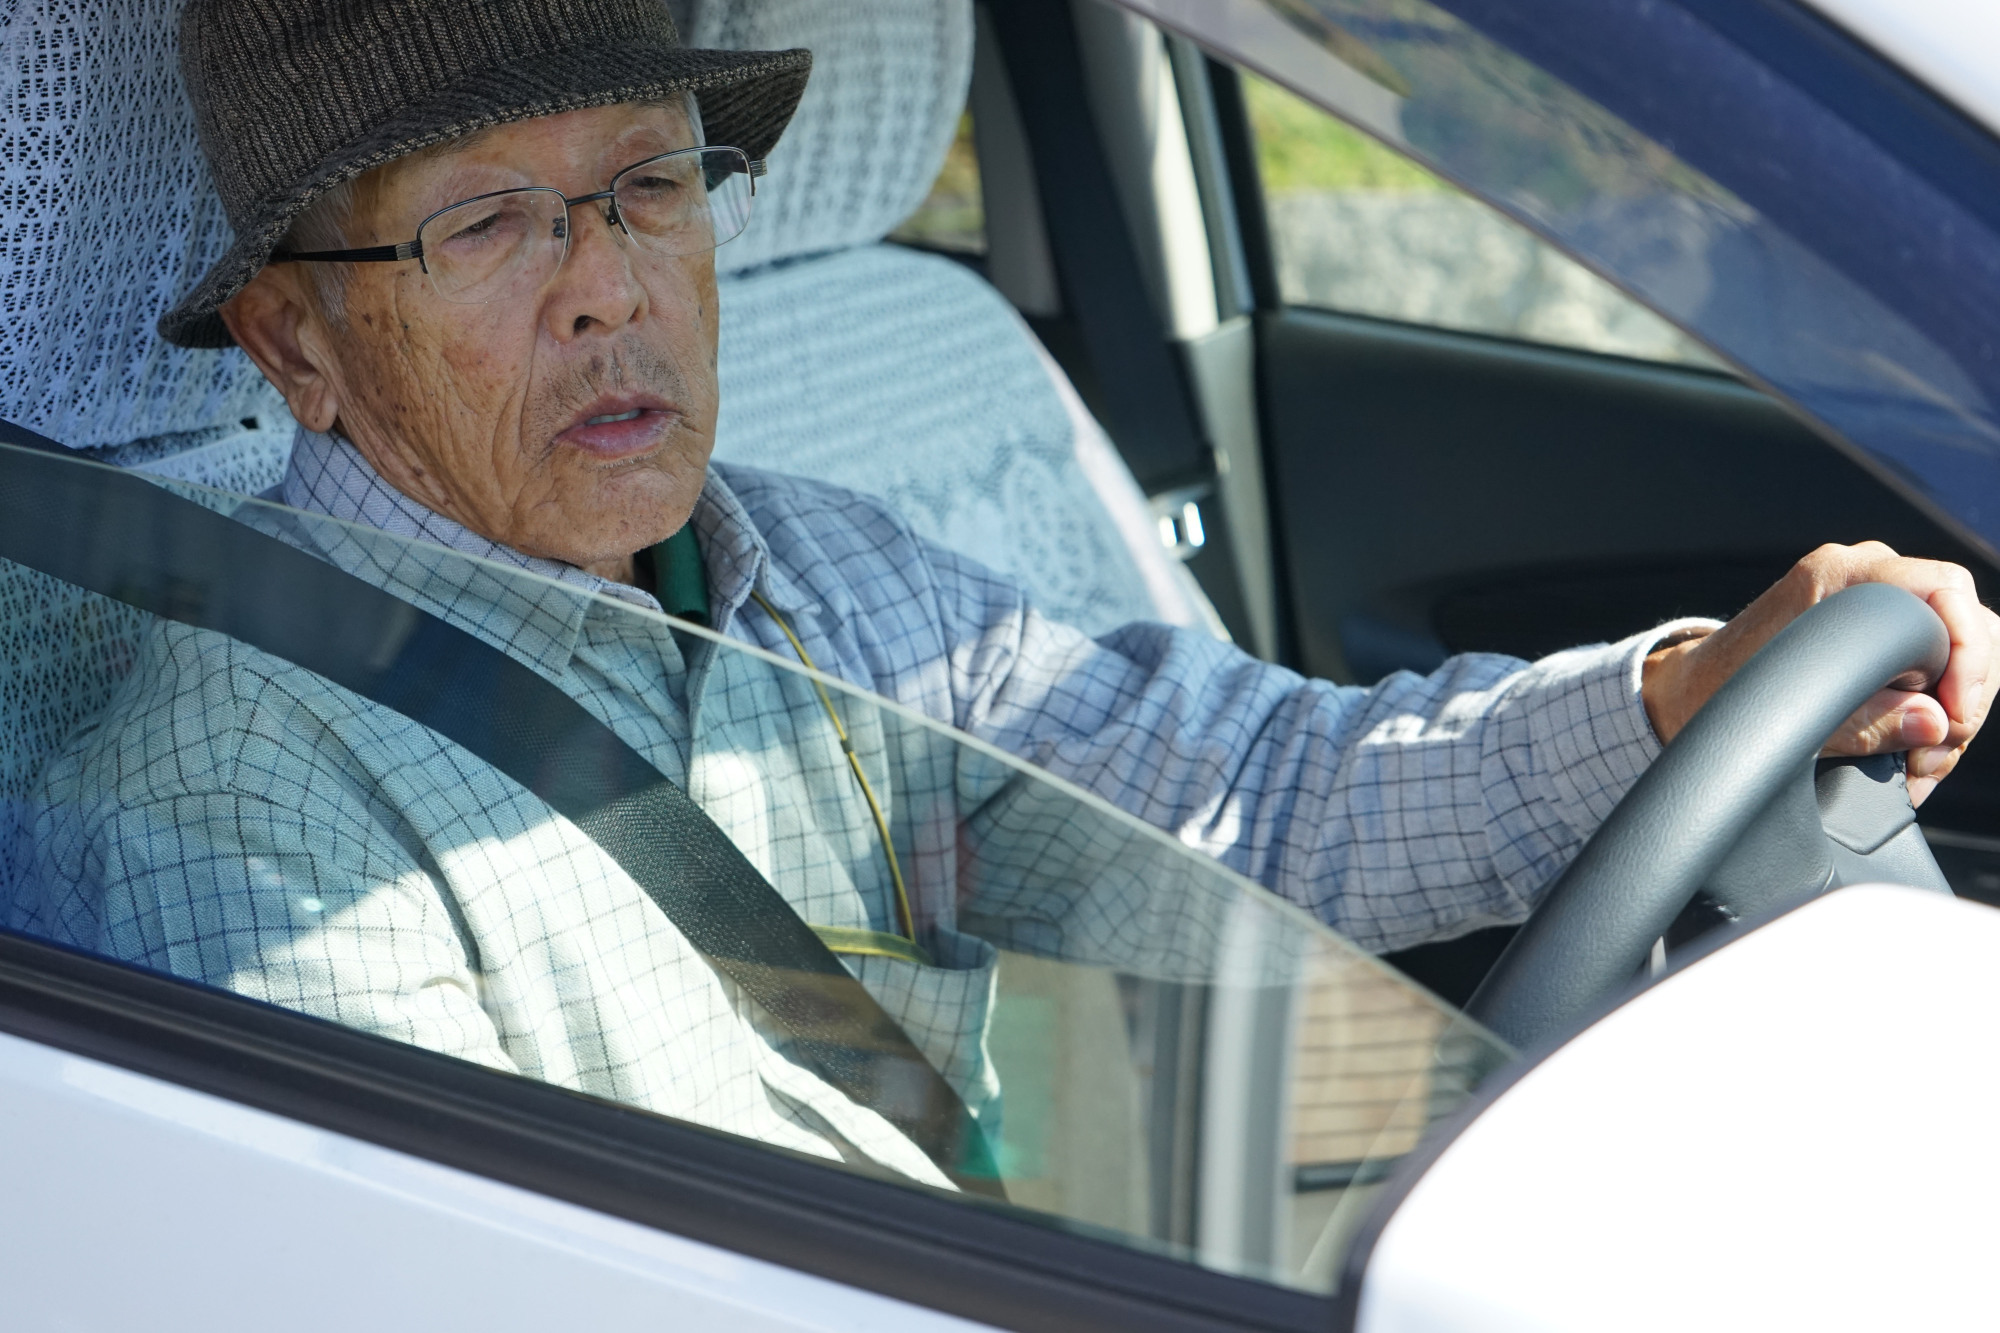 As Japan's population grays, a host of aging-related issues are gaining prominence, including extended working lives, retirement finances, senior isolation and the safety of elderly drivers. | GETTY IMAGES